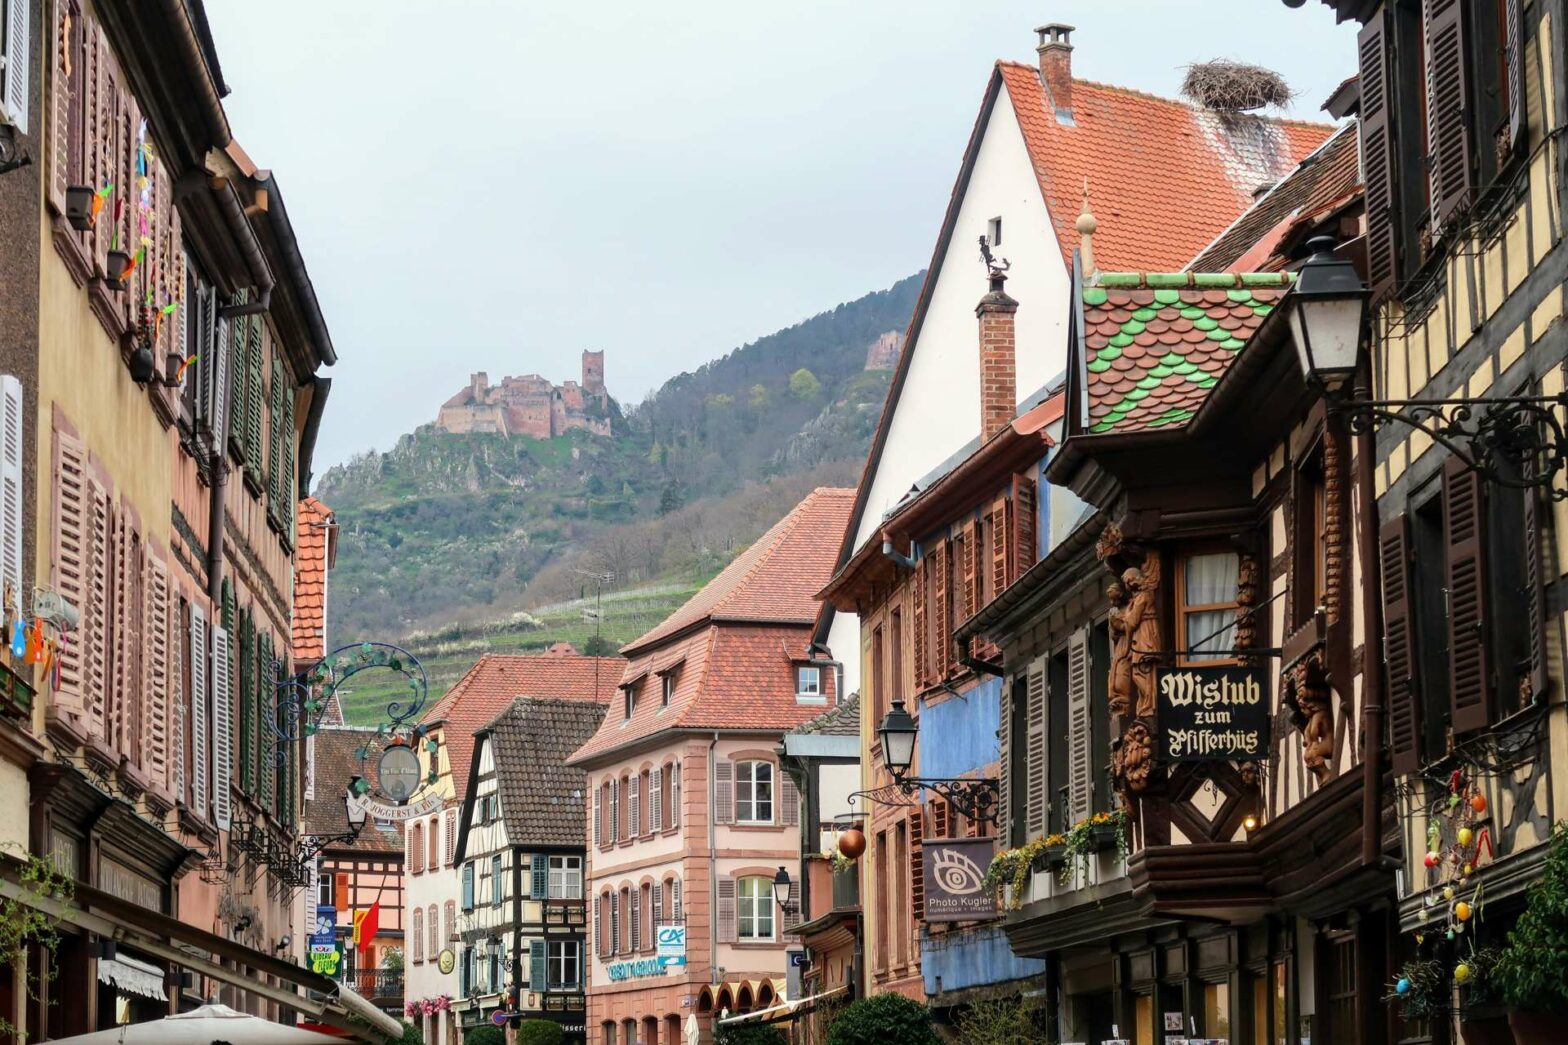 Ribeauvillé town in Alsace